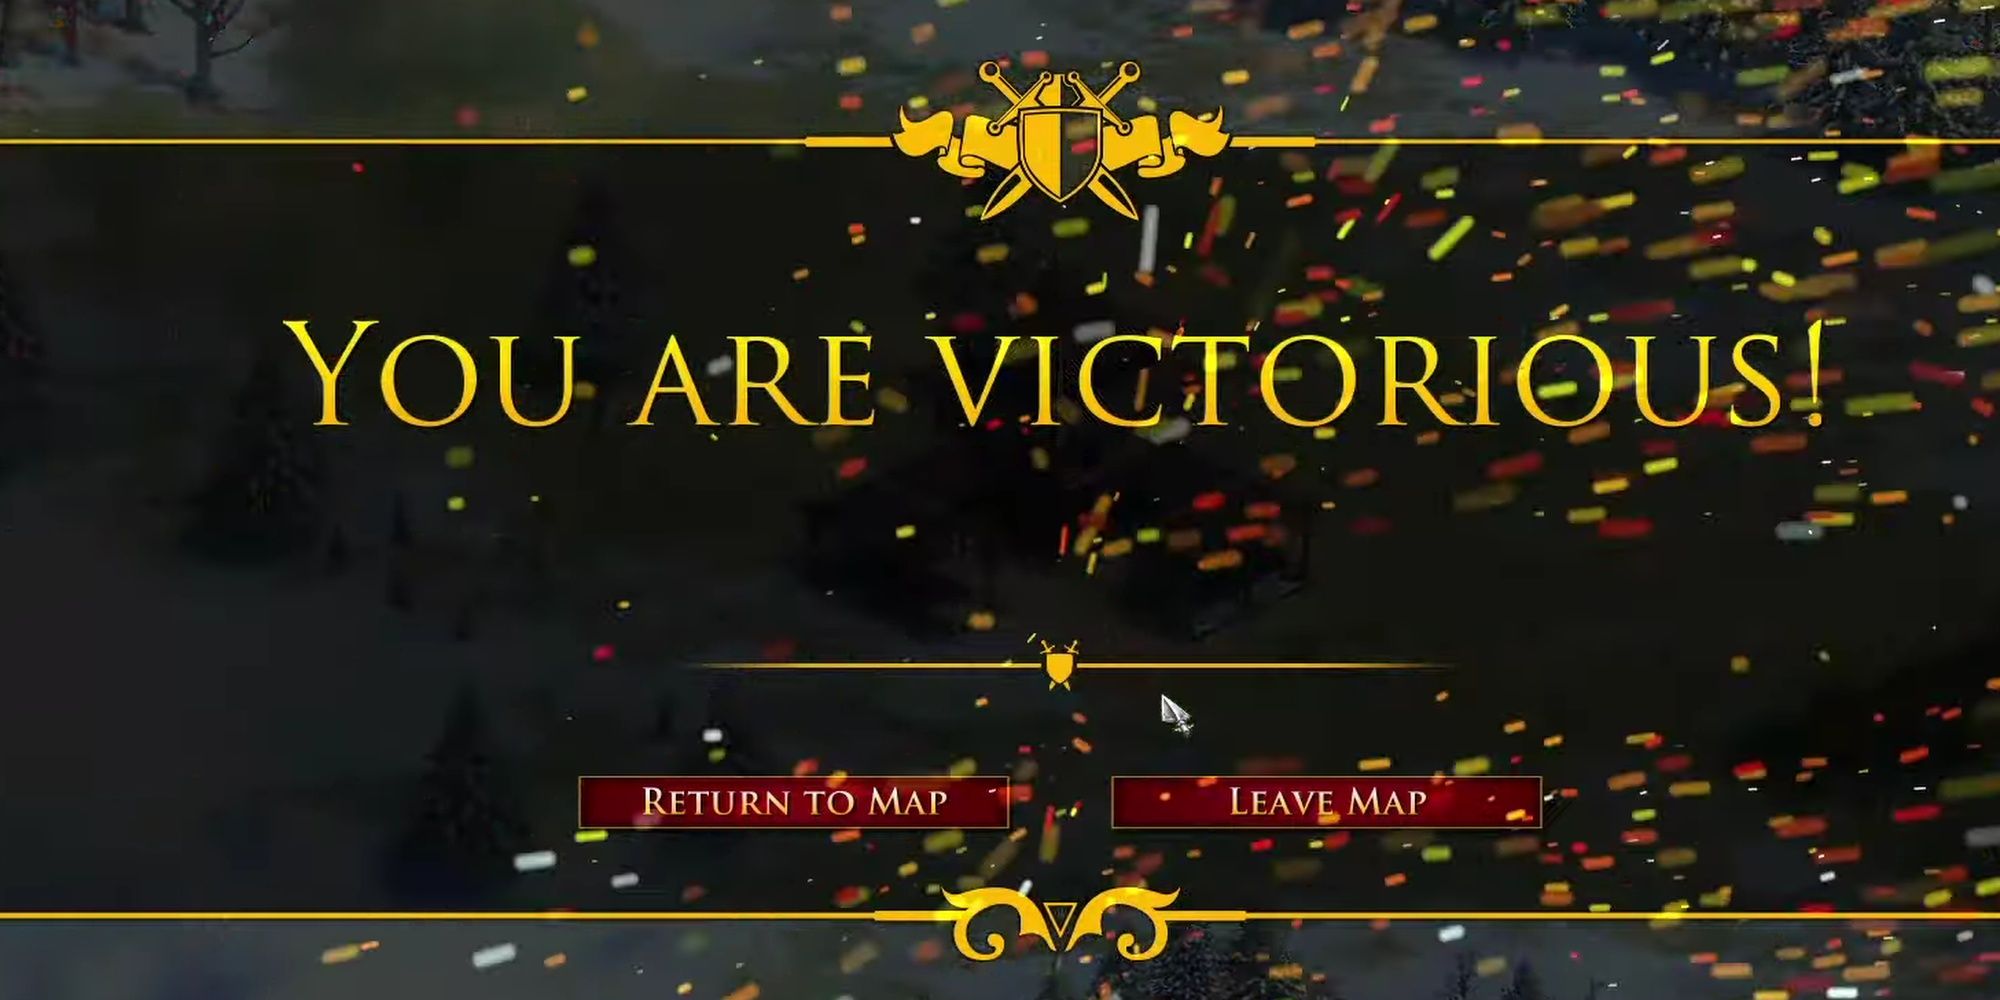 Age Of Empires: 2 - Victory Screen After Using Instant Win Cheat